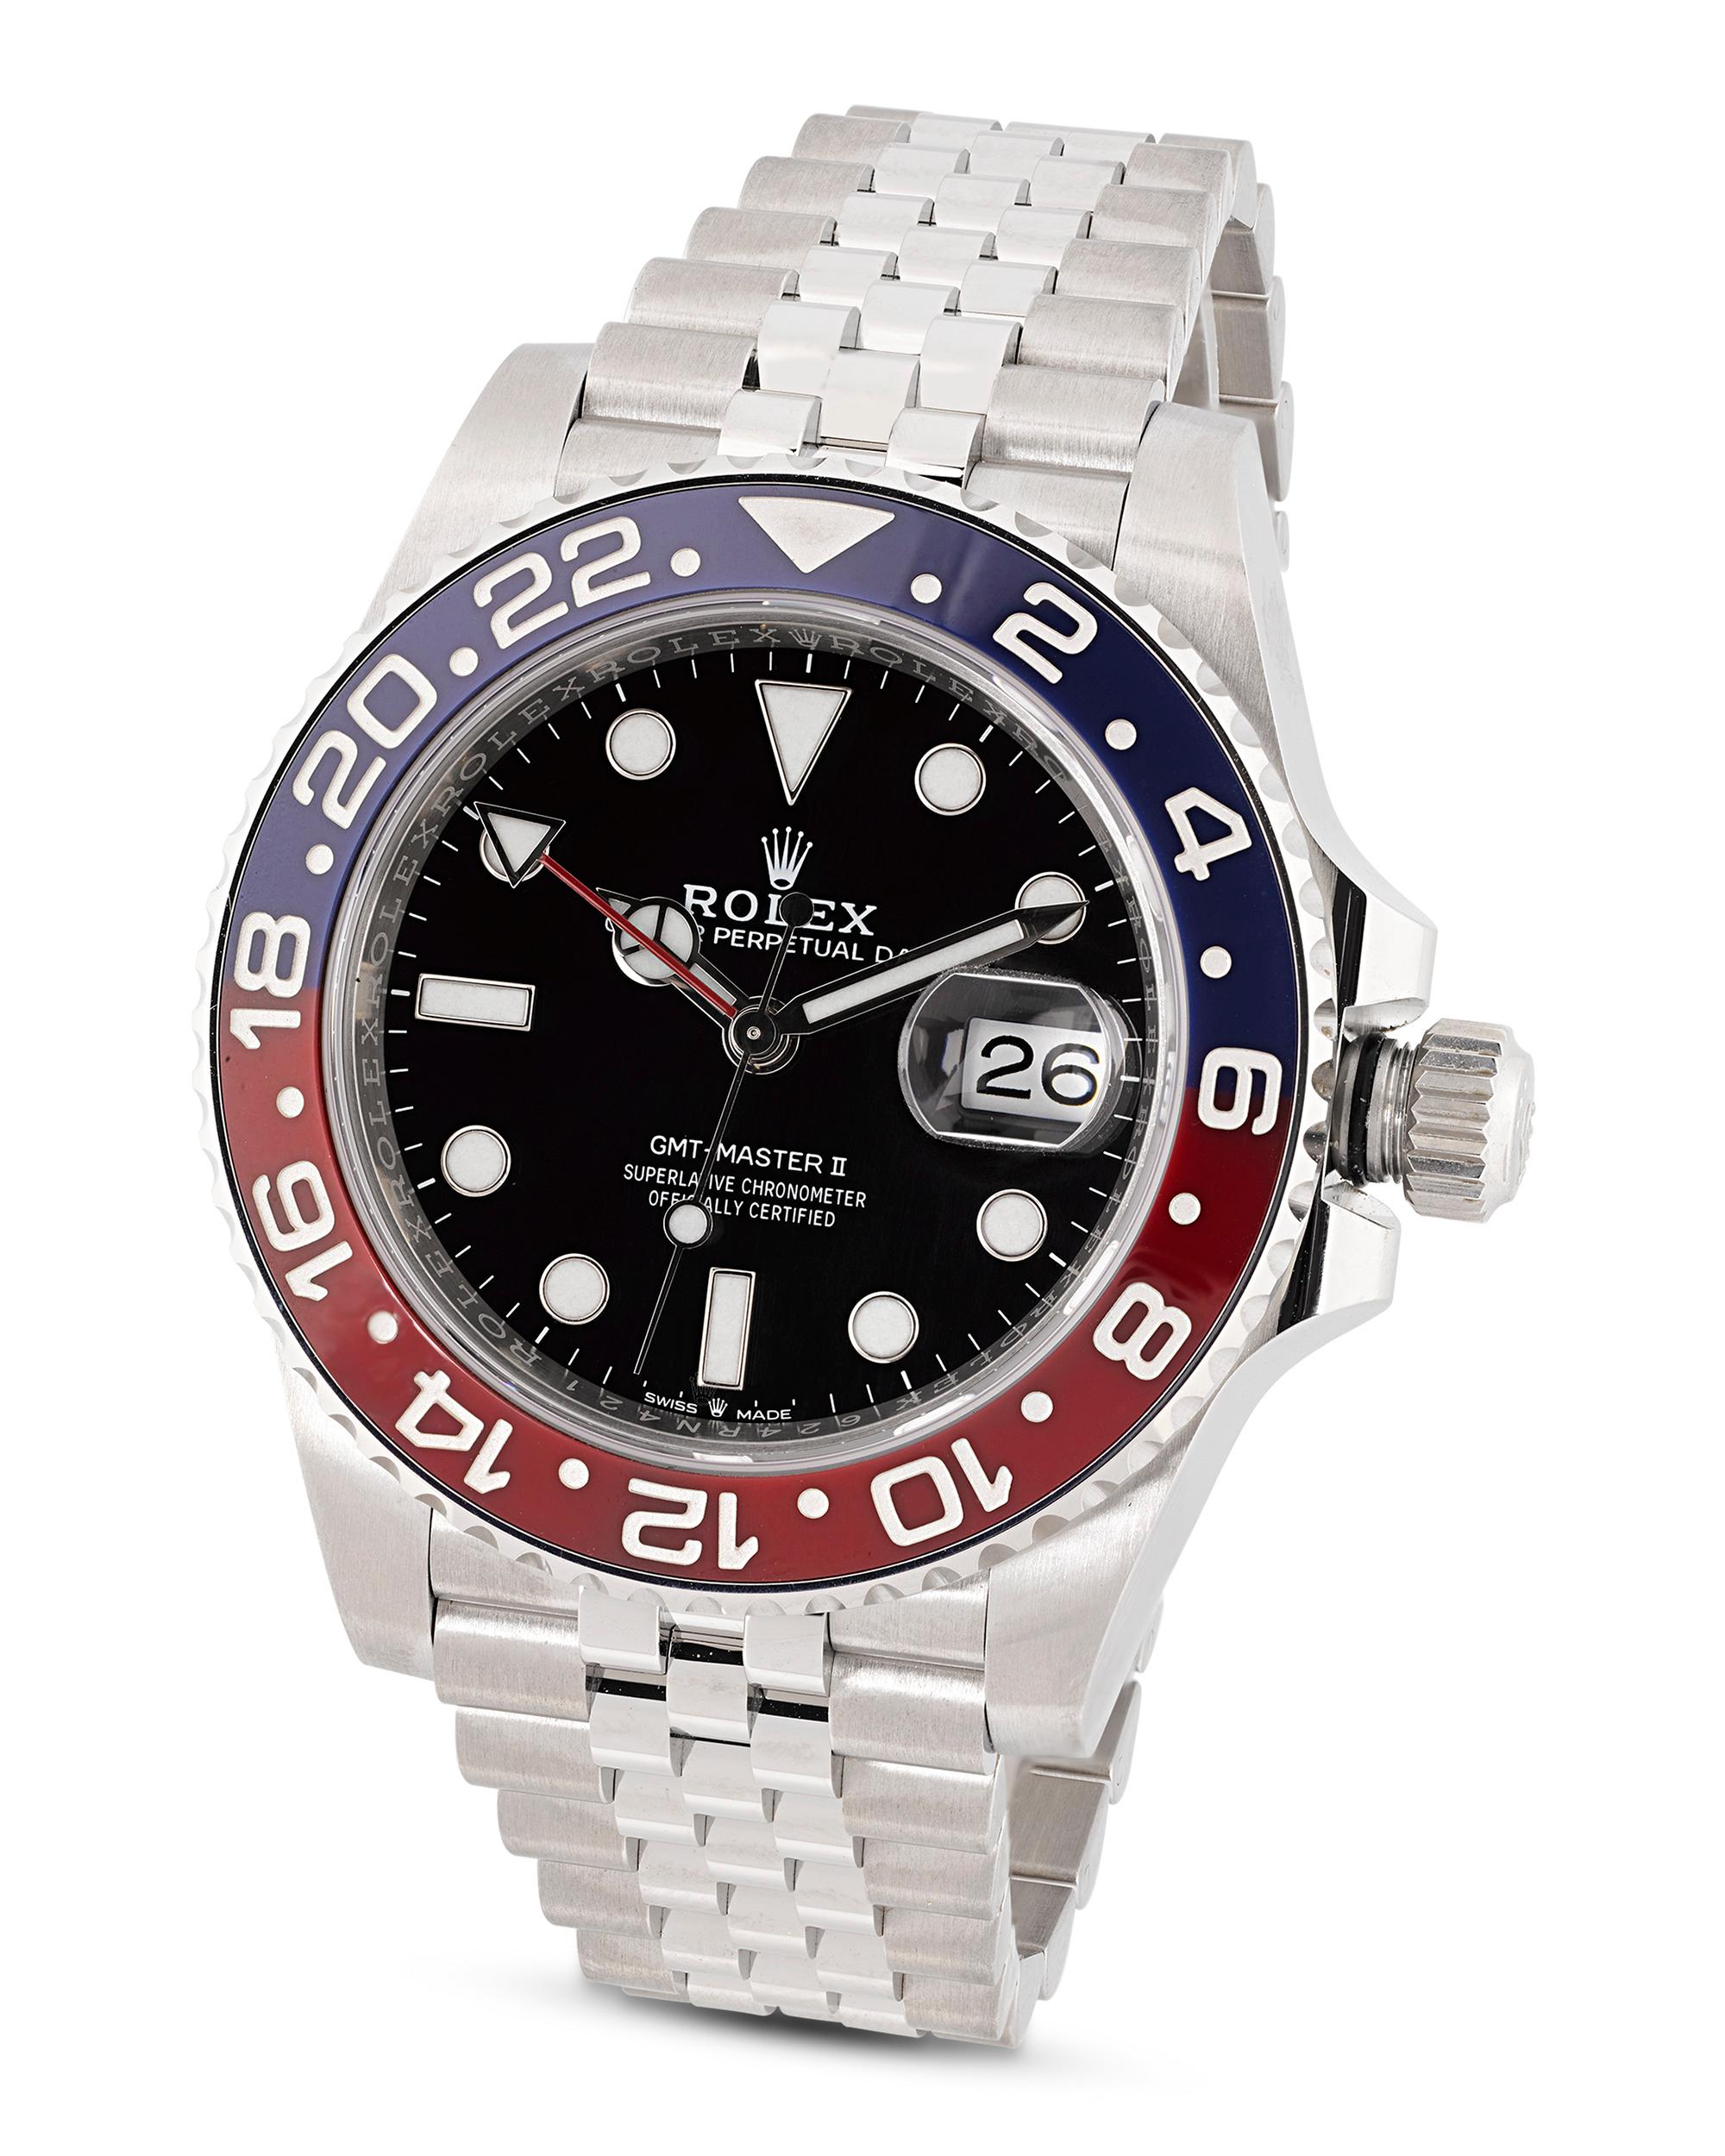 This Rolex GMT-Master II reference 126710BLRO wristwatch is an iconic design from the distinguished watchmakers. Debuted in 1953 and originally made for Pan Am pilots to keep track of time zones during transatlantic flights, the watch features a